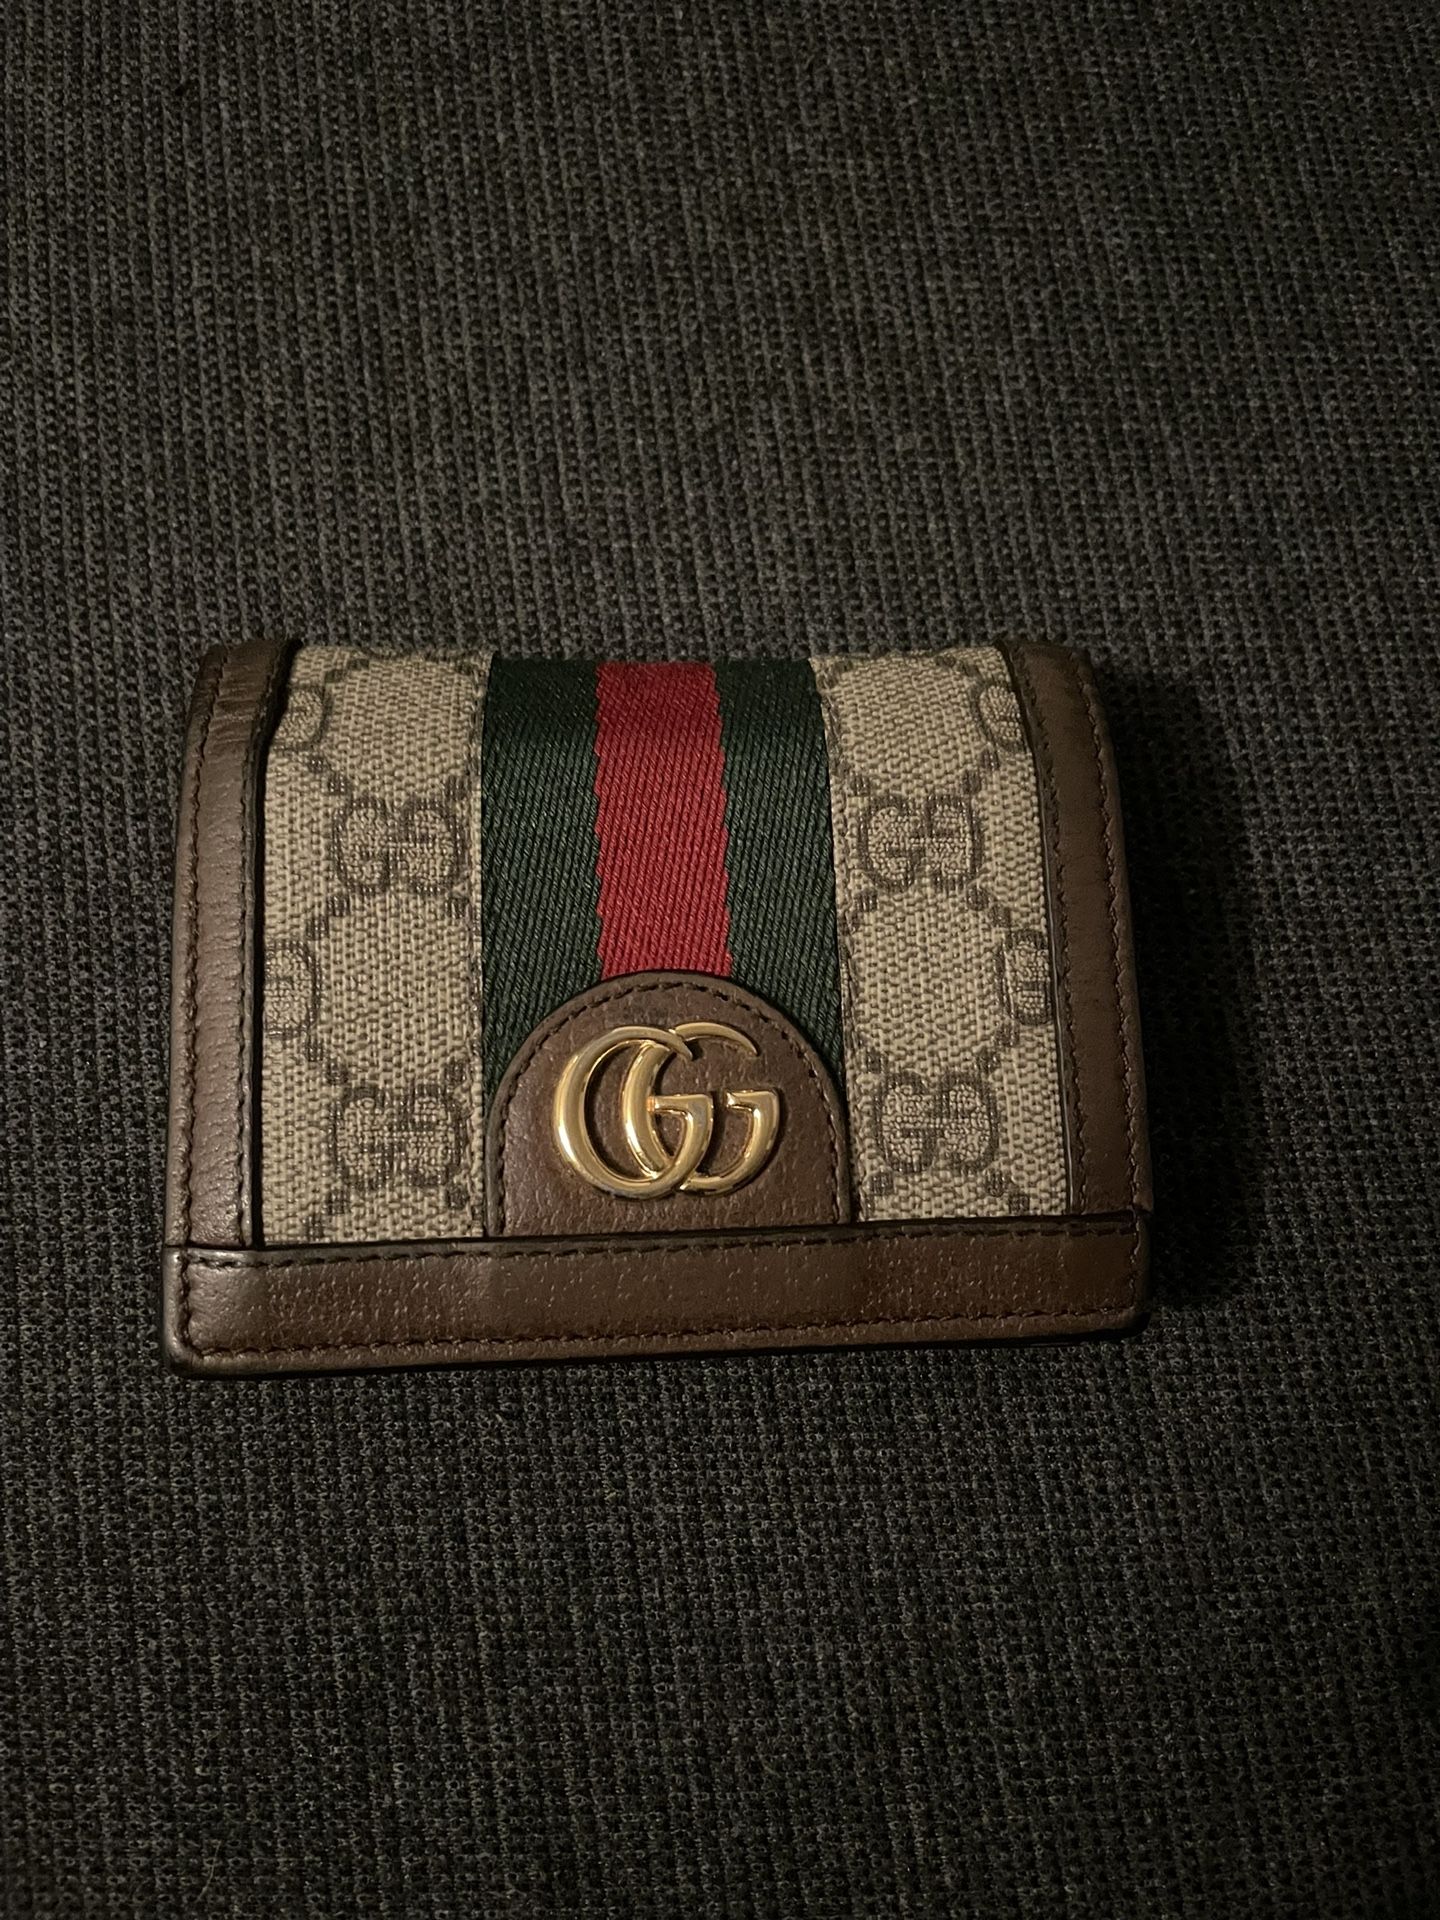 OPHIDIA GG CARD CASE WALLET *AUTHENTIC* 